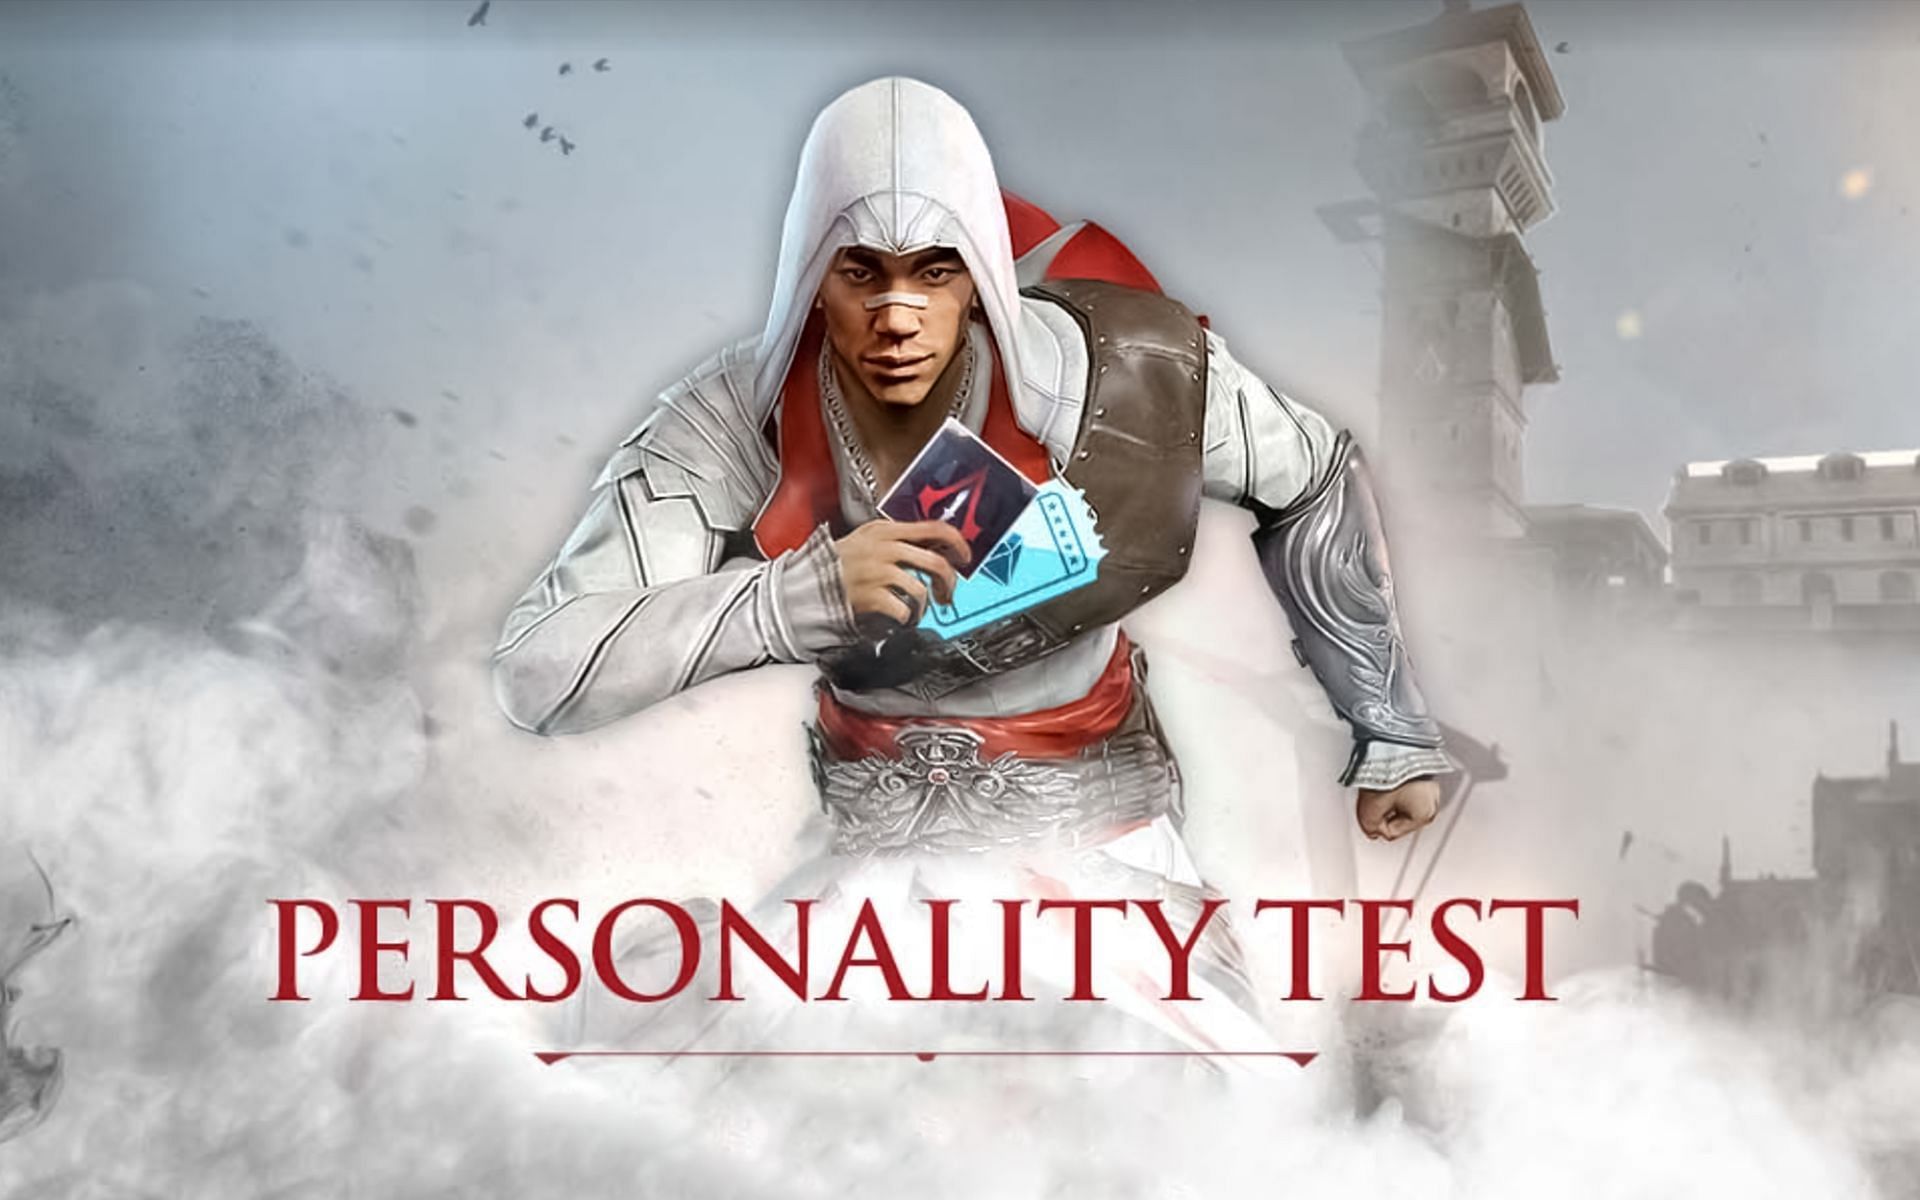 Personality Test event will be available until 13 March (Image via Garena)